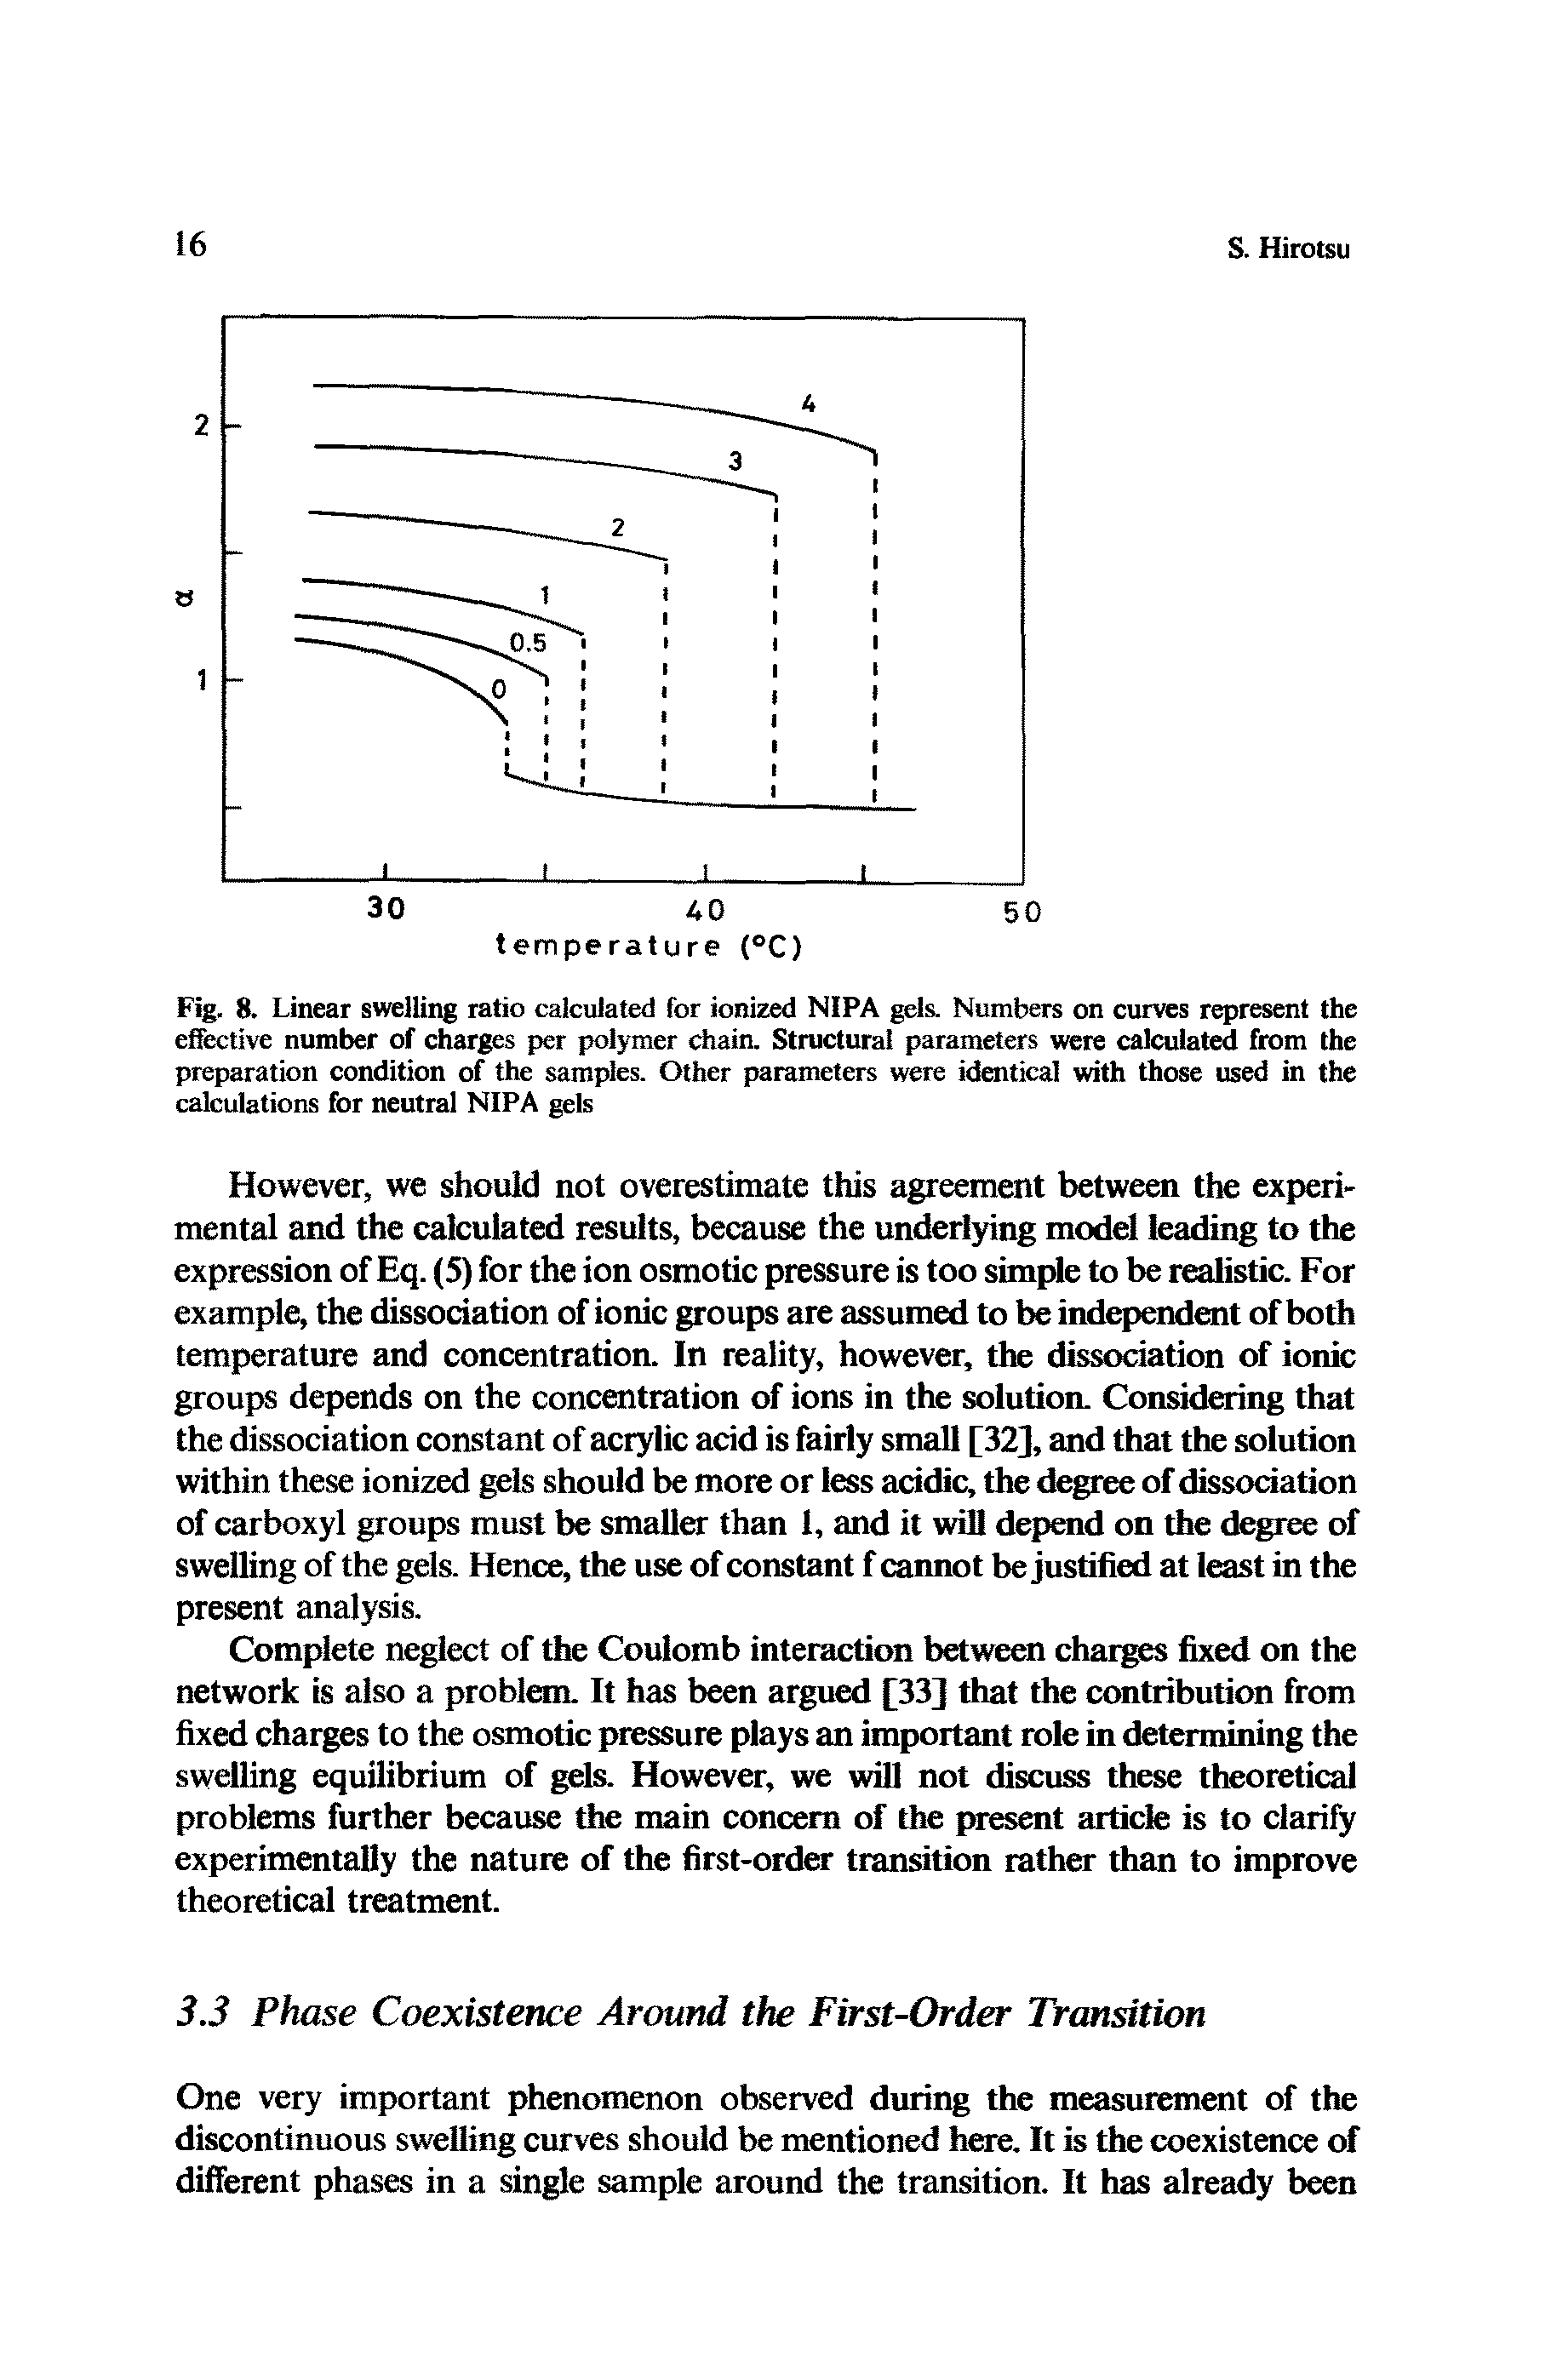 Fig. 8. Linear swelling ratio calculated for ionized NIPA gels. Numbers on curves represent the effective number of charges per polymer chain. Structural parameters were calculated from the preparation condition of the samples. Other parameters were identical with those used in the calculations for neutral NIPA gels...